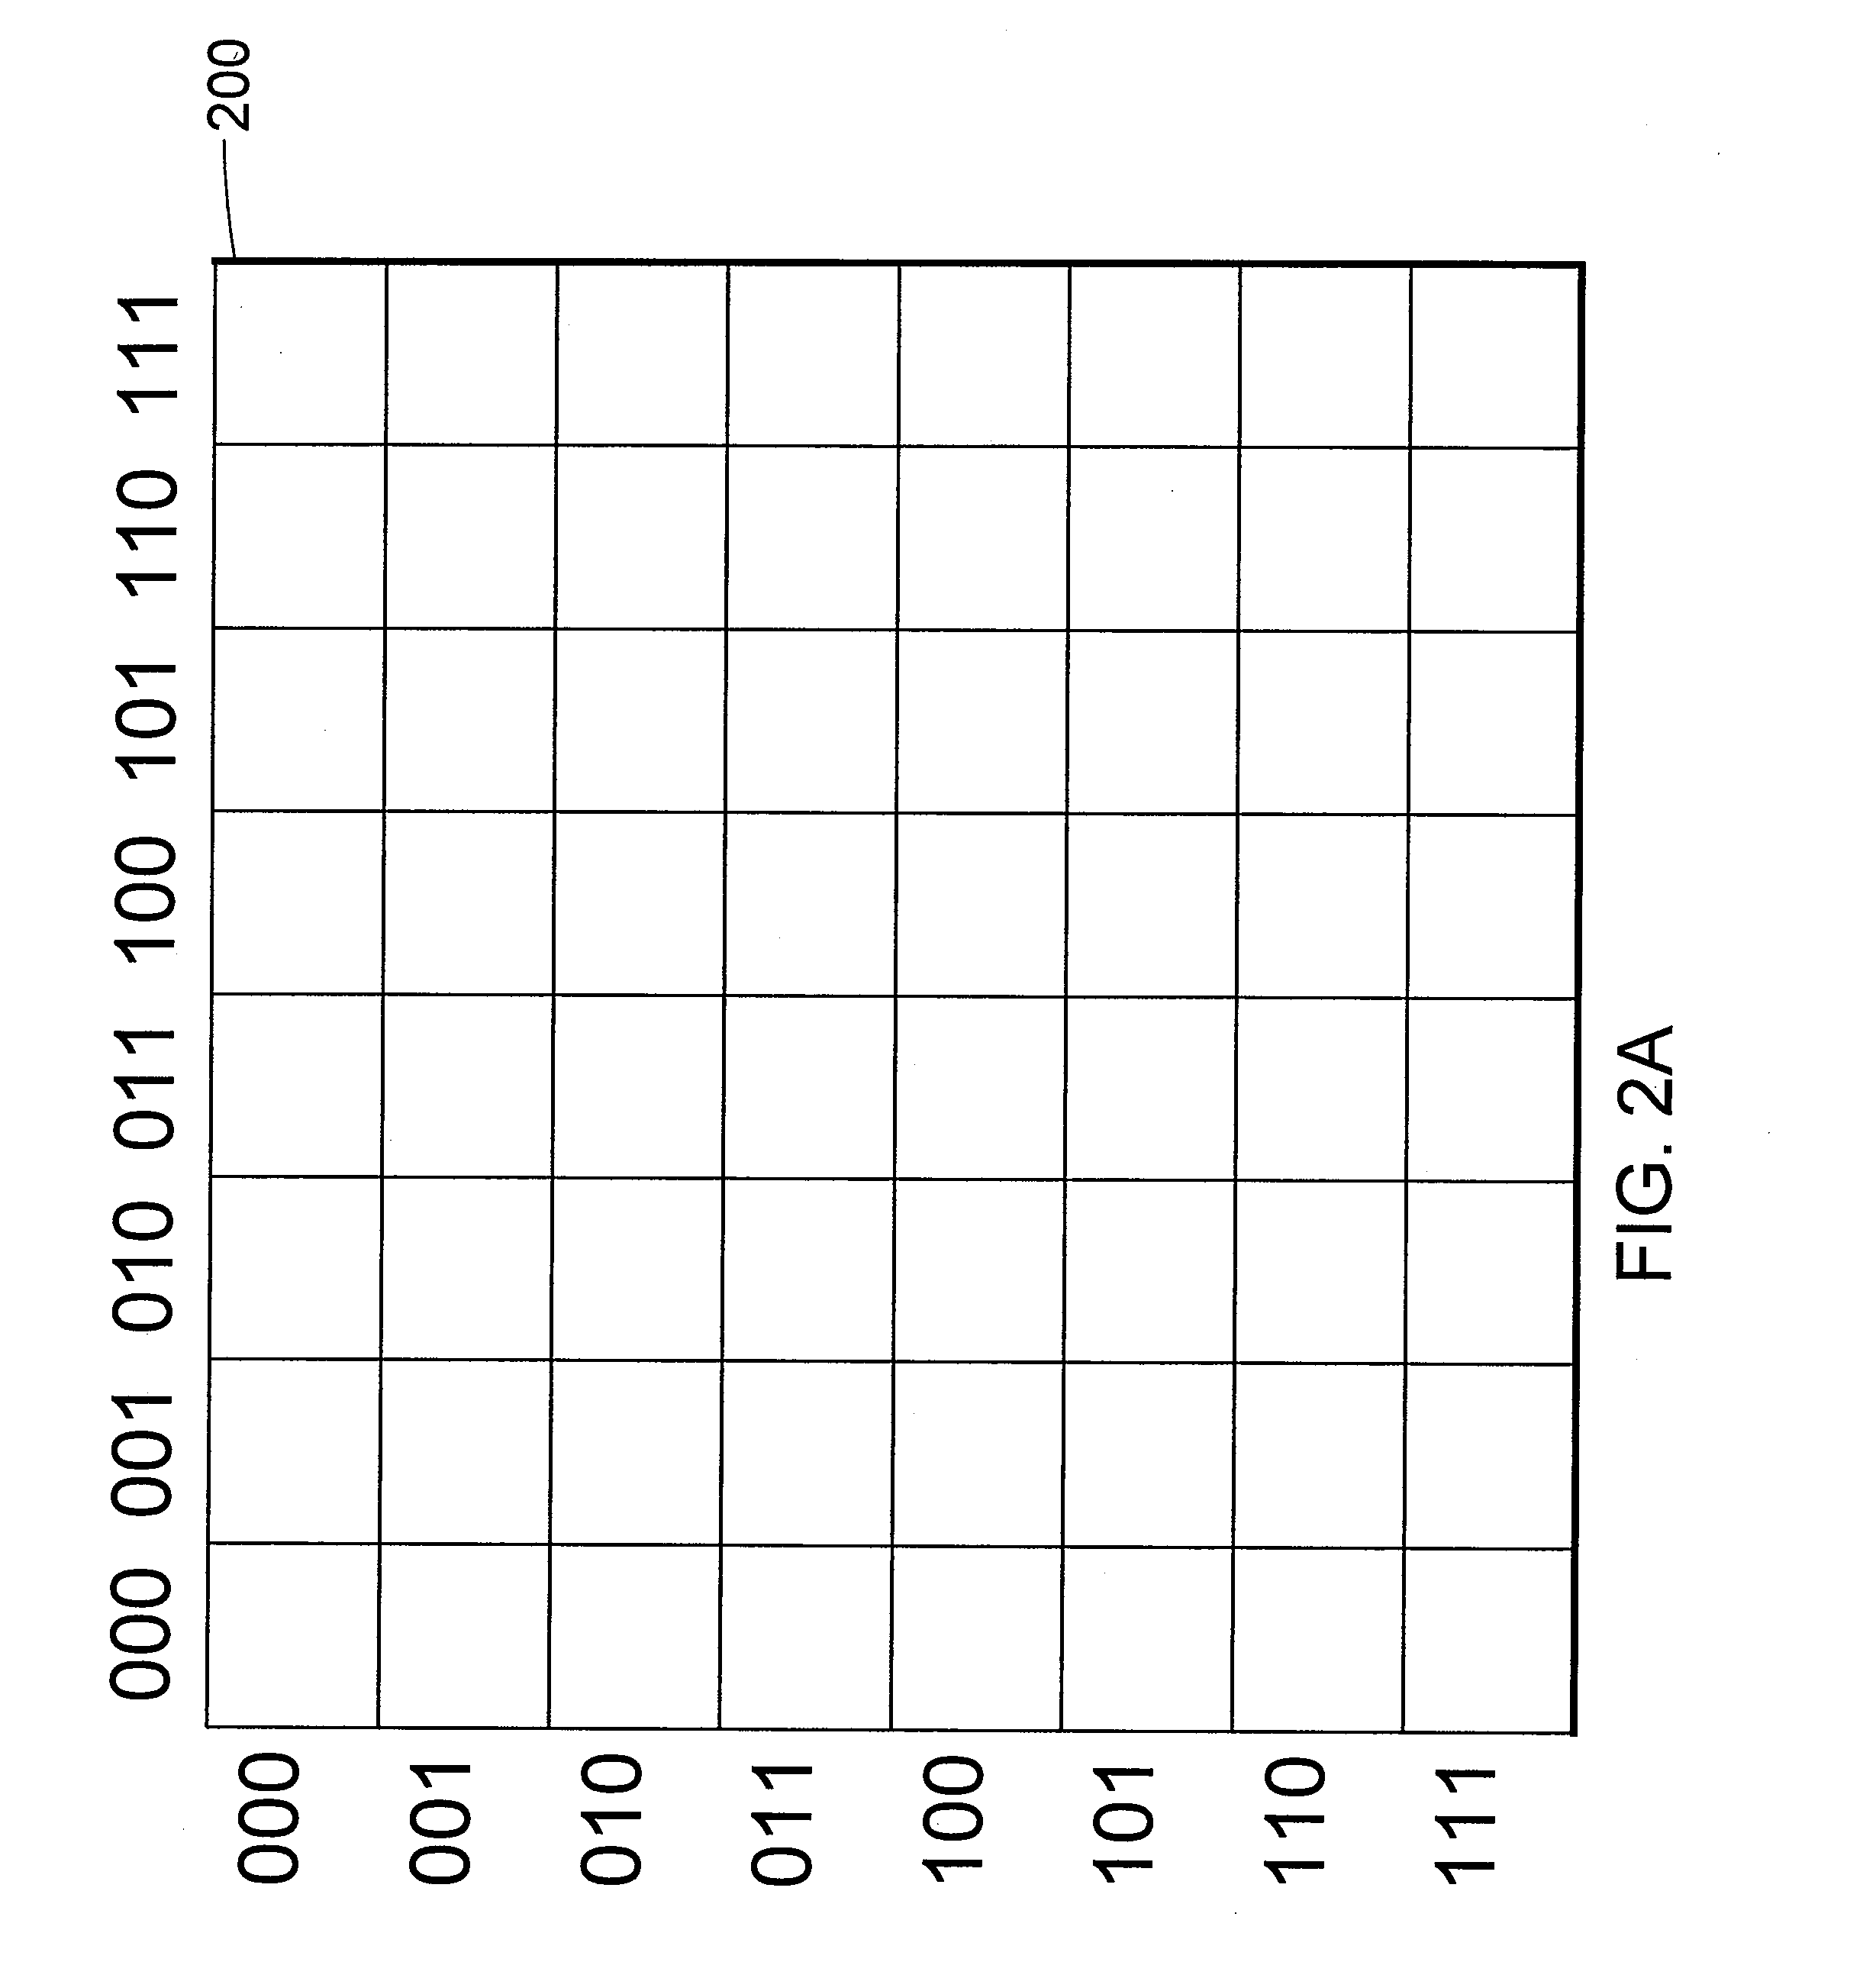 Systems, methods and apparatus for protein folding simulation